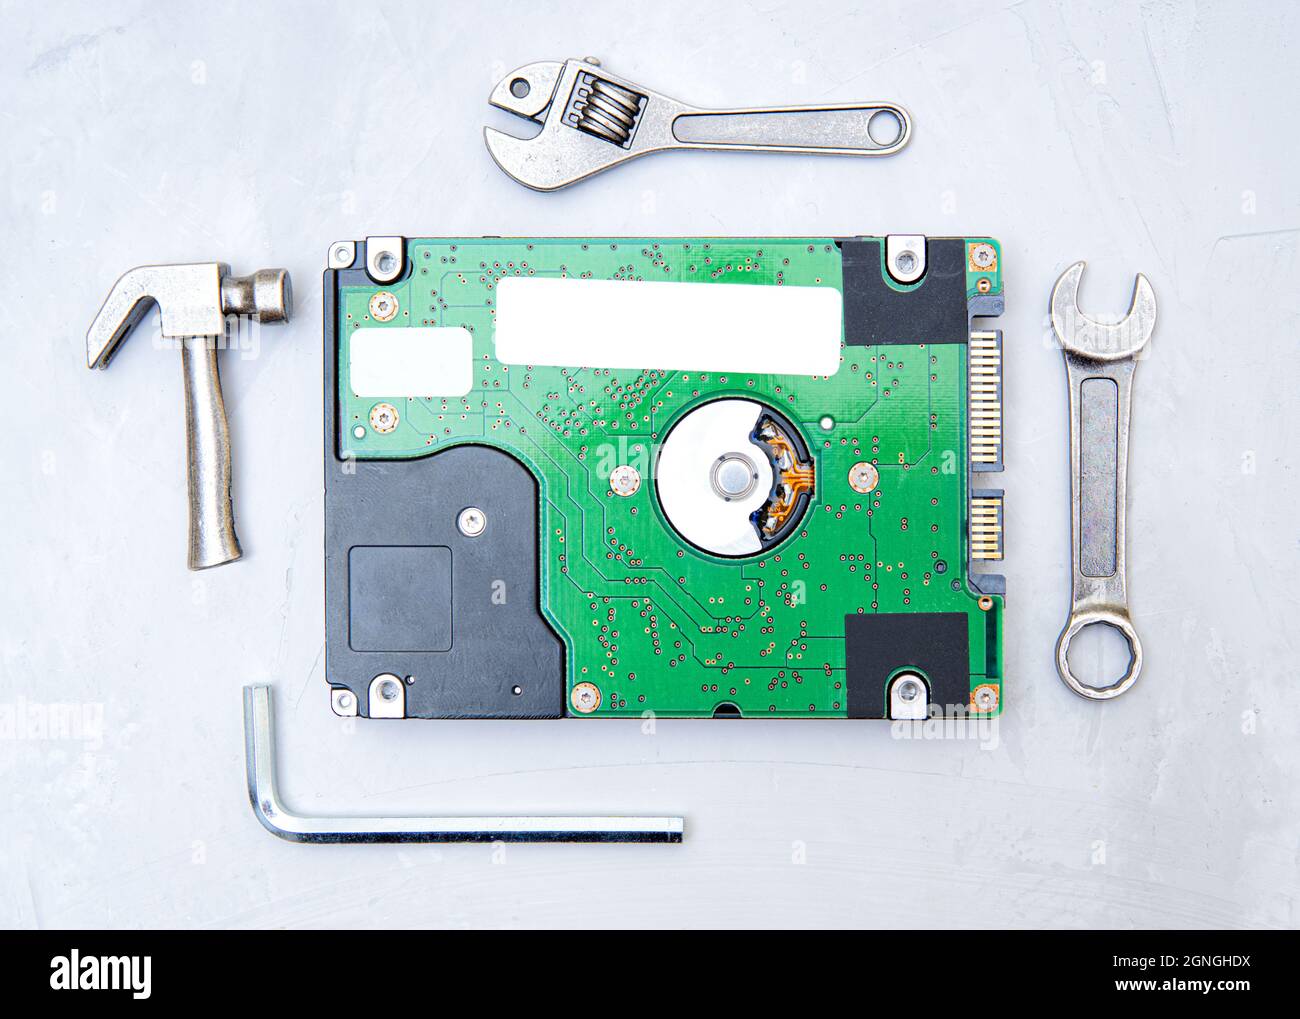 Hard drive disk with no cover framed with small copies of popular hand tools on a concrete background. The concept of using proper tools for the job. Stock Photo